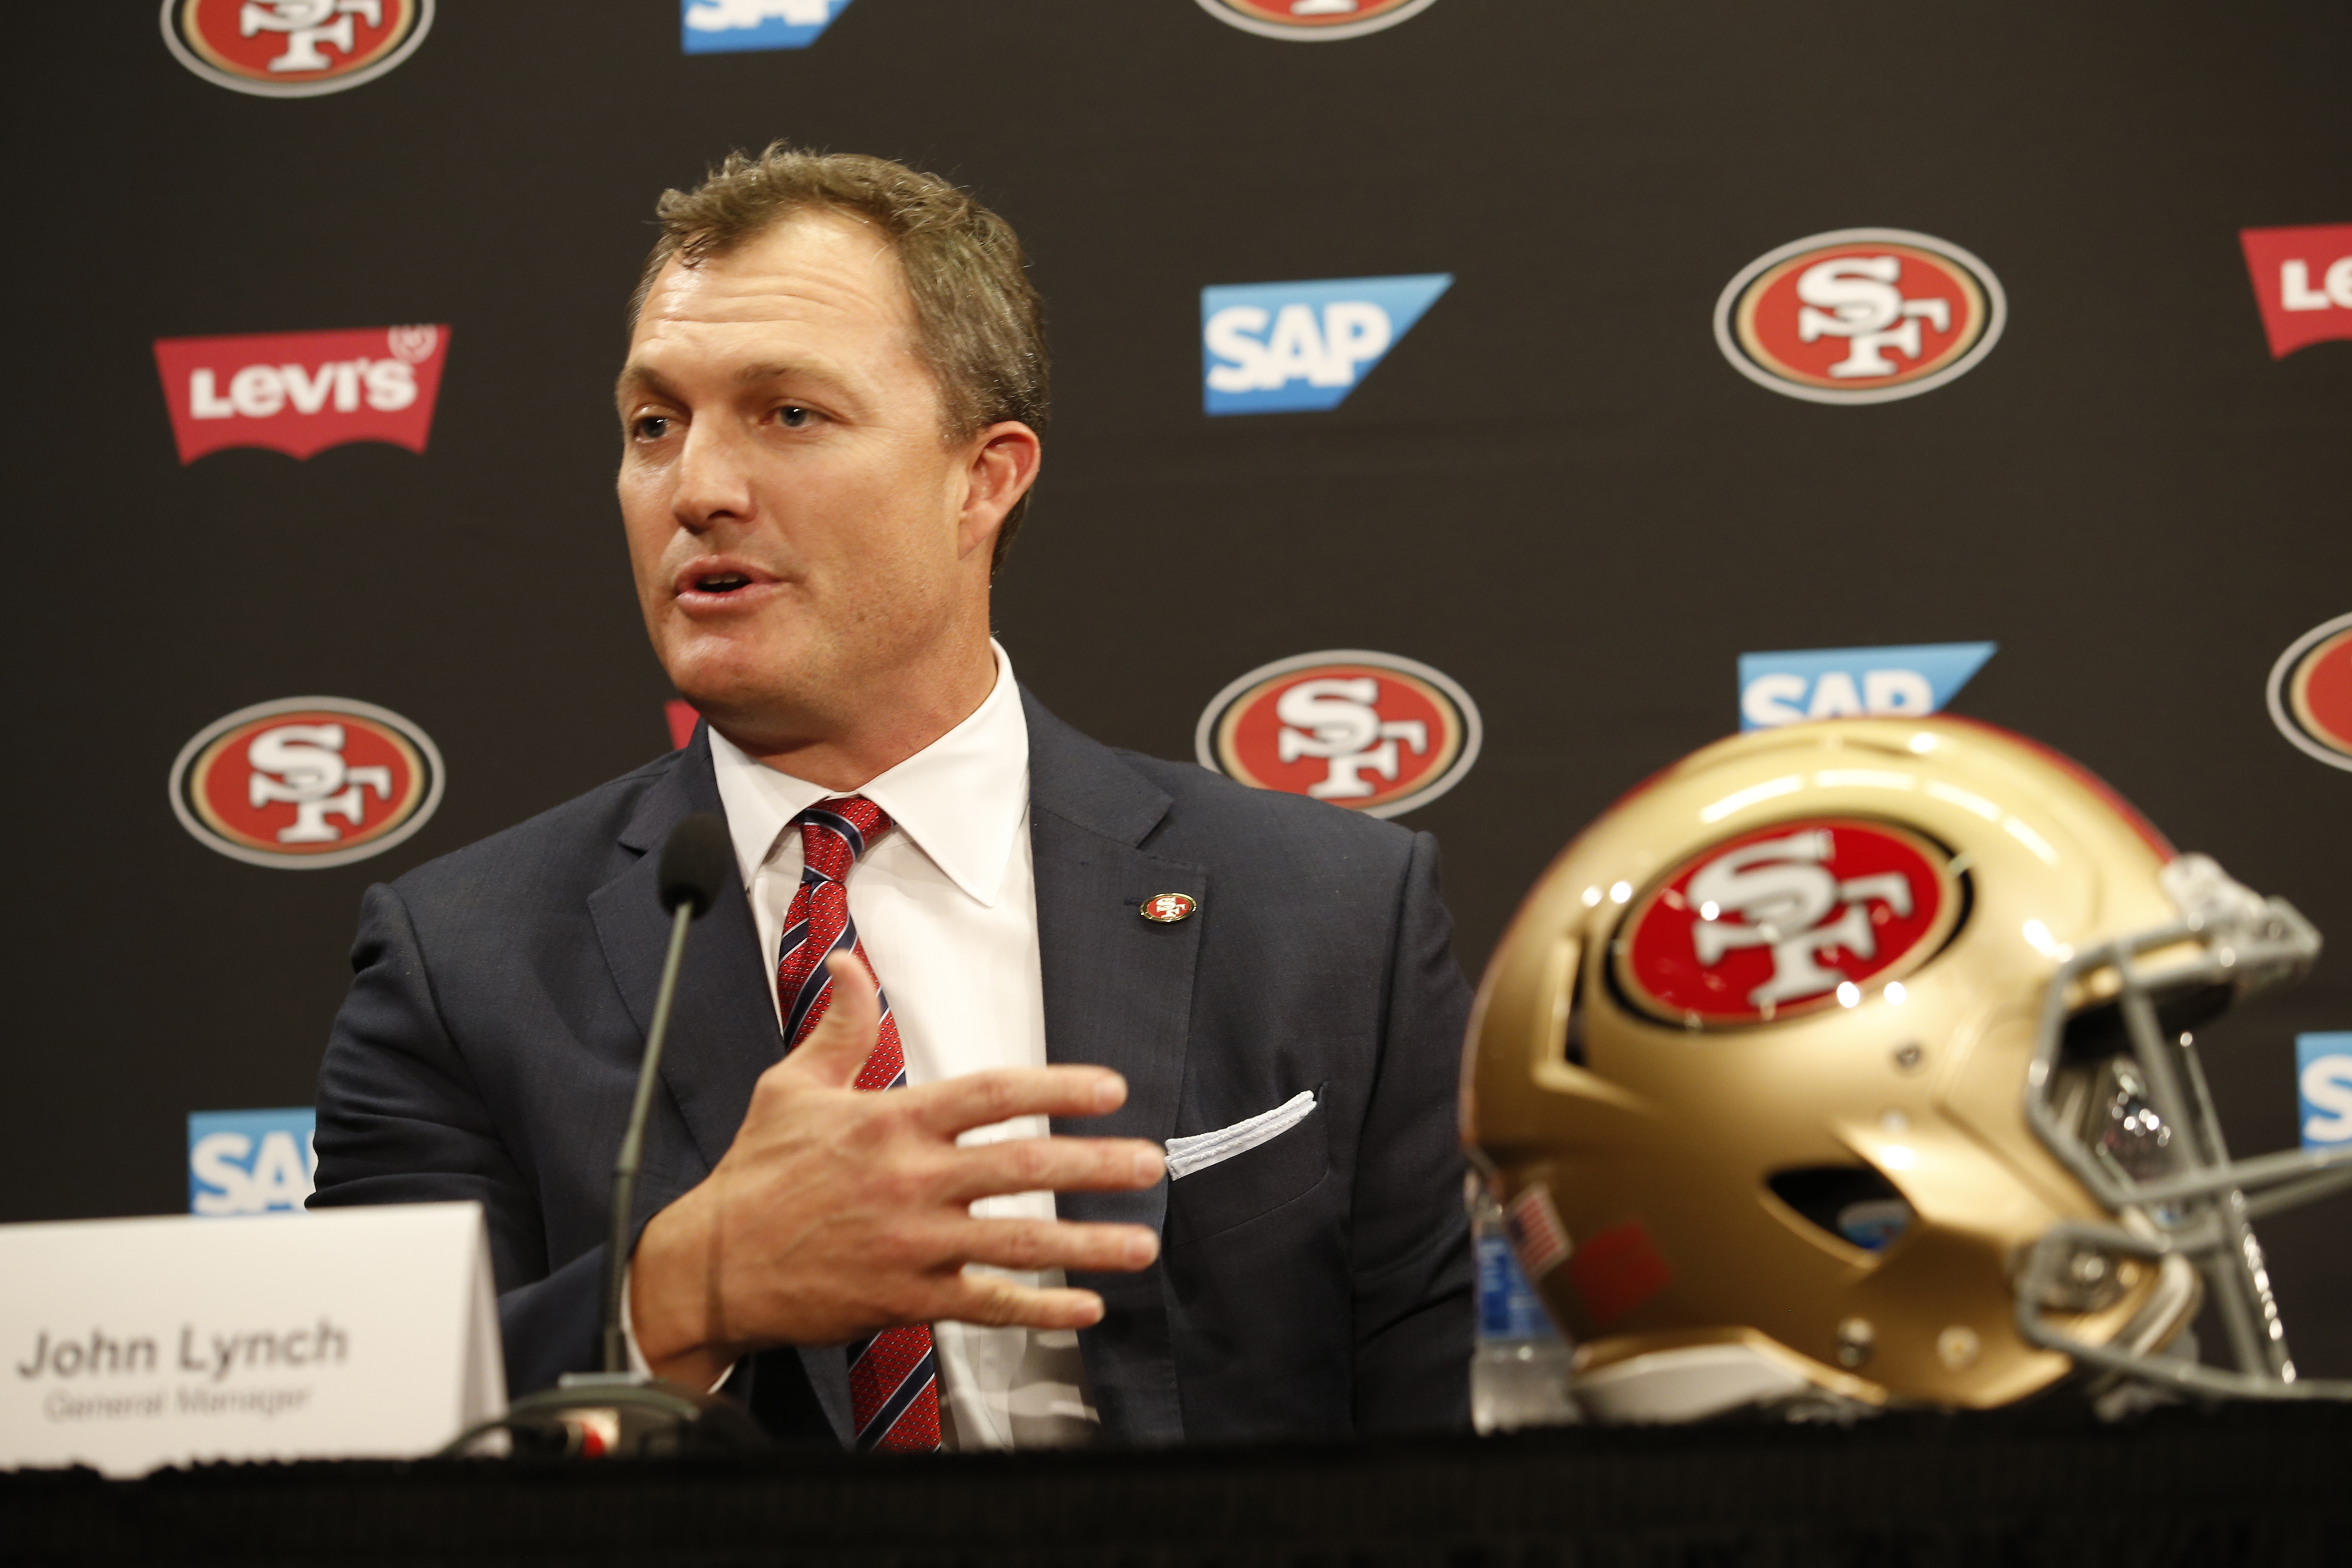 SANTA CLARA, CA - FEBRUARY 9: General Manager John Lynch of the San Francisco 49ers addresses the media during a press conference at Levi Stadium on February 9, 2017 in Santa Clara, California. The 49ers press conference was setup to introducing the new general manager, John Lynch, and the teams new head coach, Kyle Shanahan.